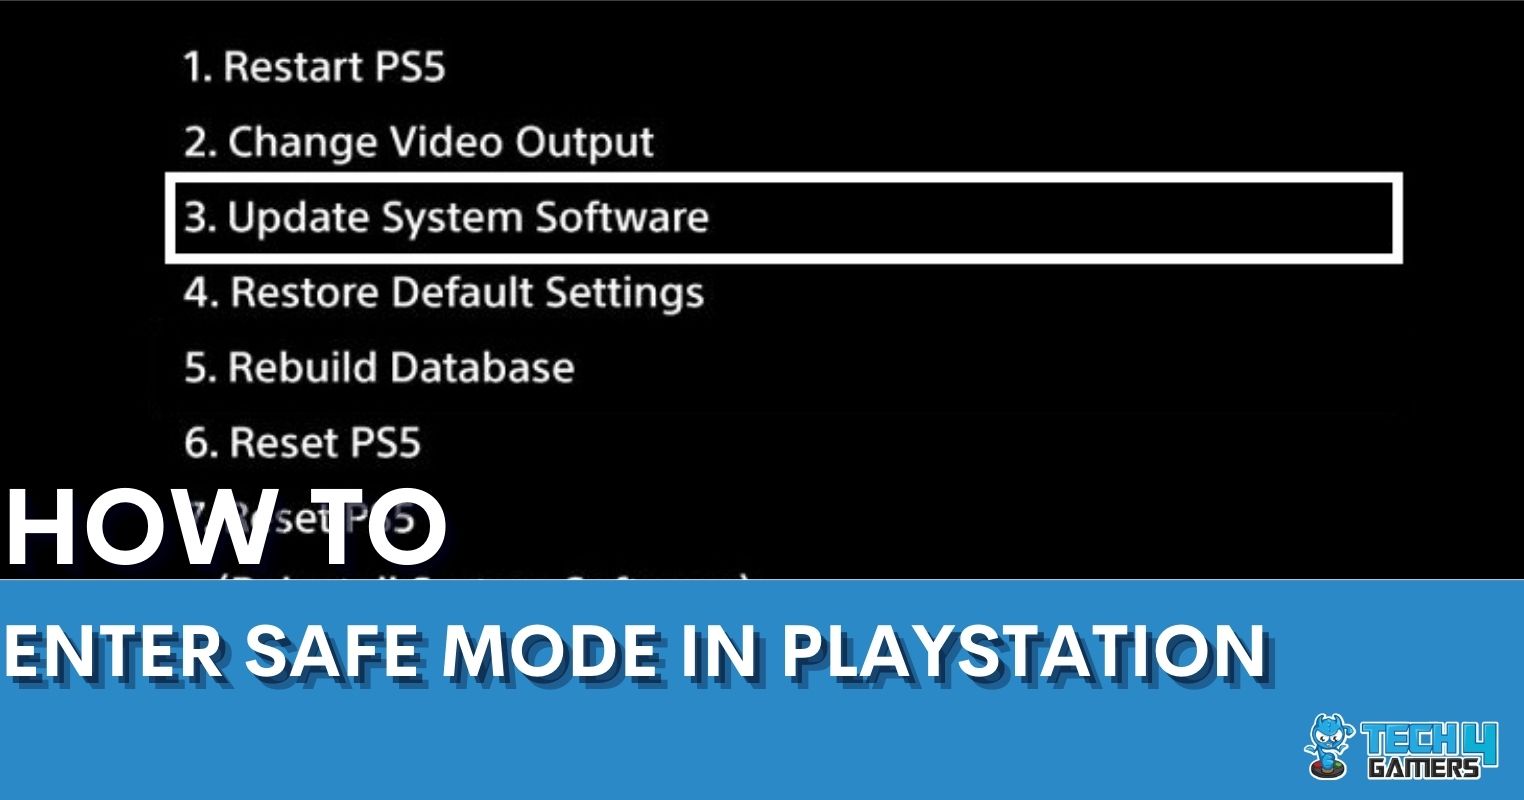 HOW TO enter safe mode in playstation